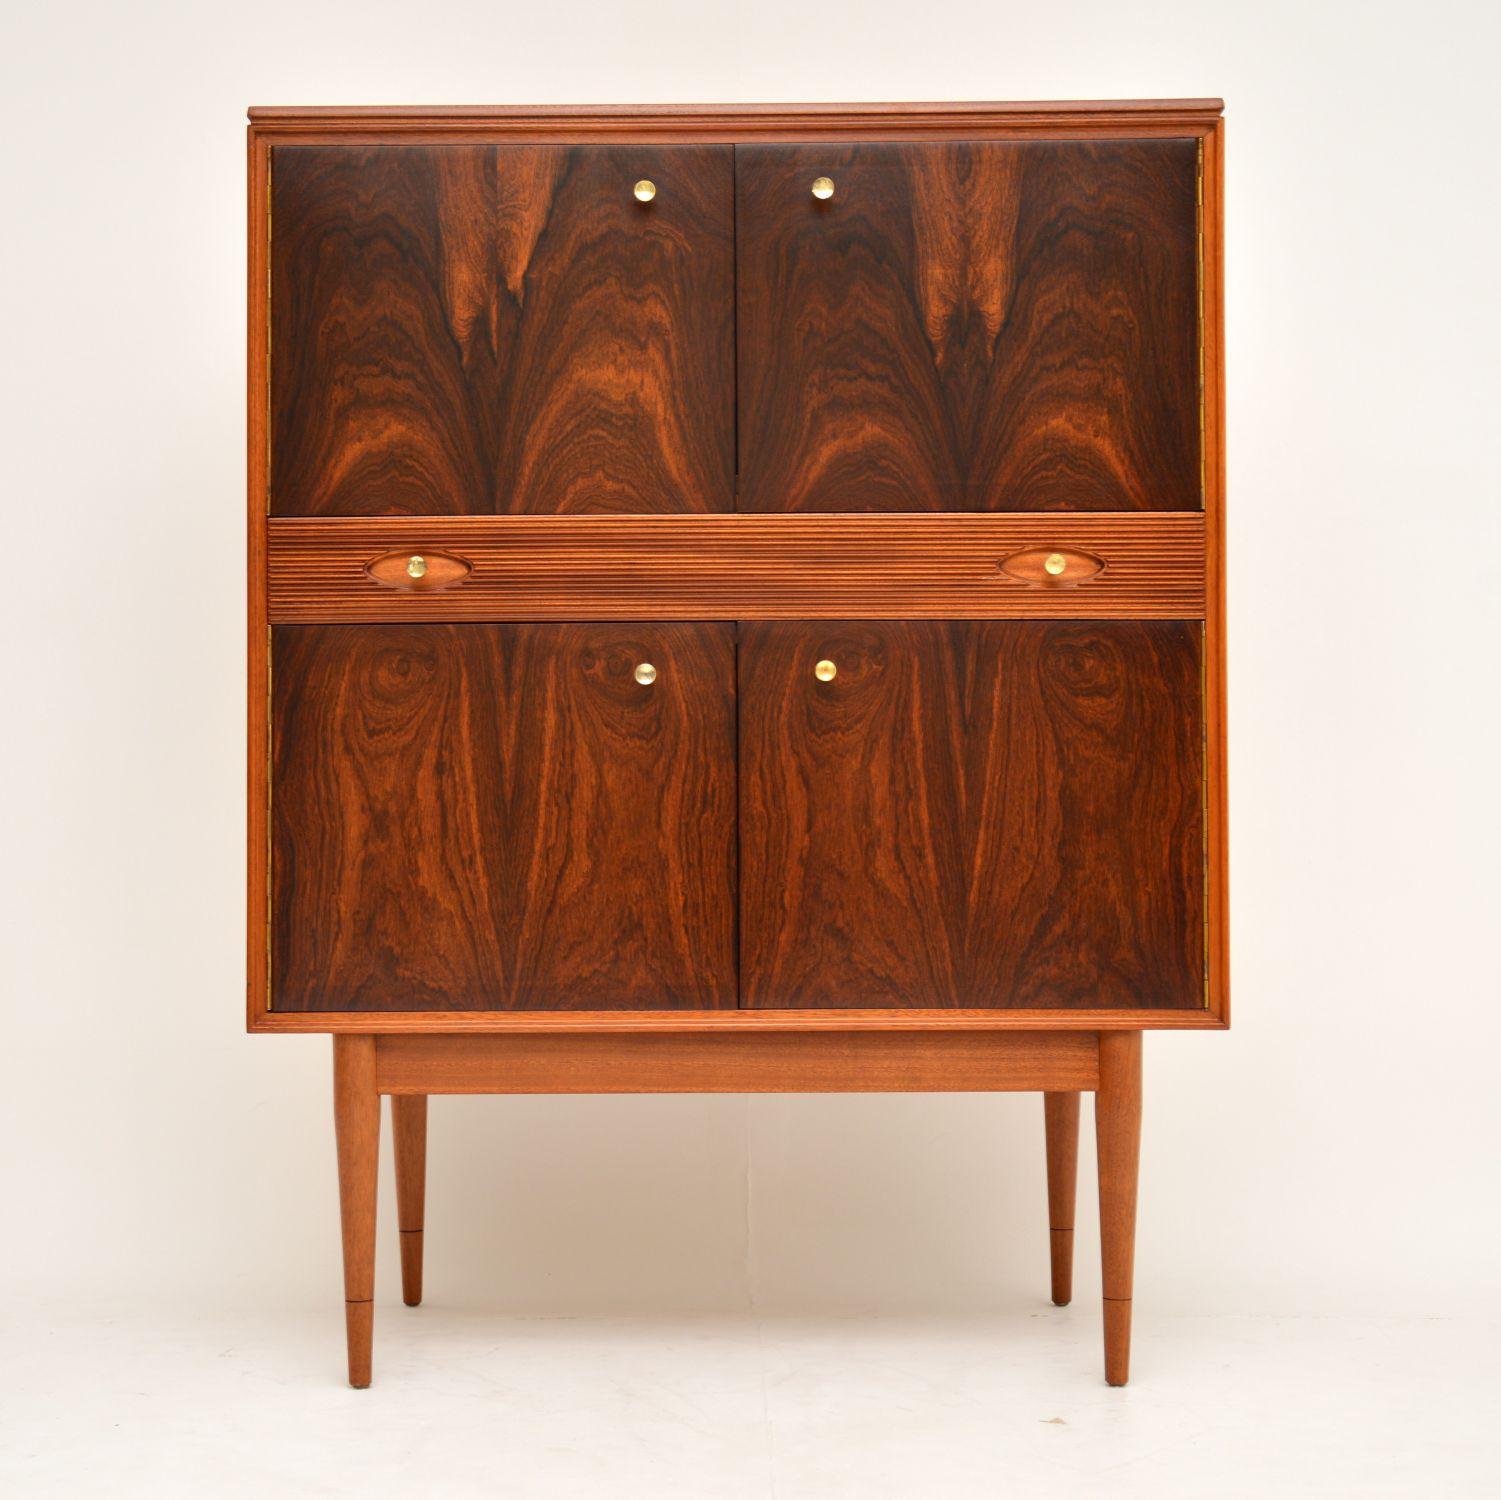 A stunning vintage drinks cabinet, designed by Robert Heritage for Archie Shine. This is part of the award winning Hamilton range, and it dates from the 1960s. The doors are in rosewood, with stunning grain patterns and a beautiful color. The